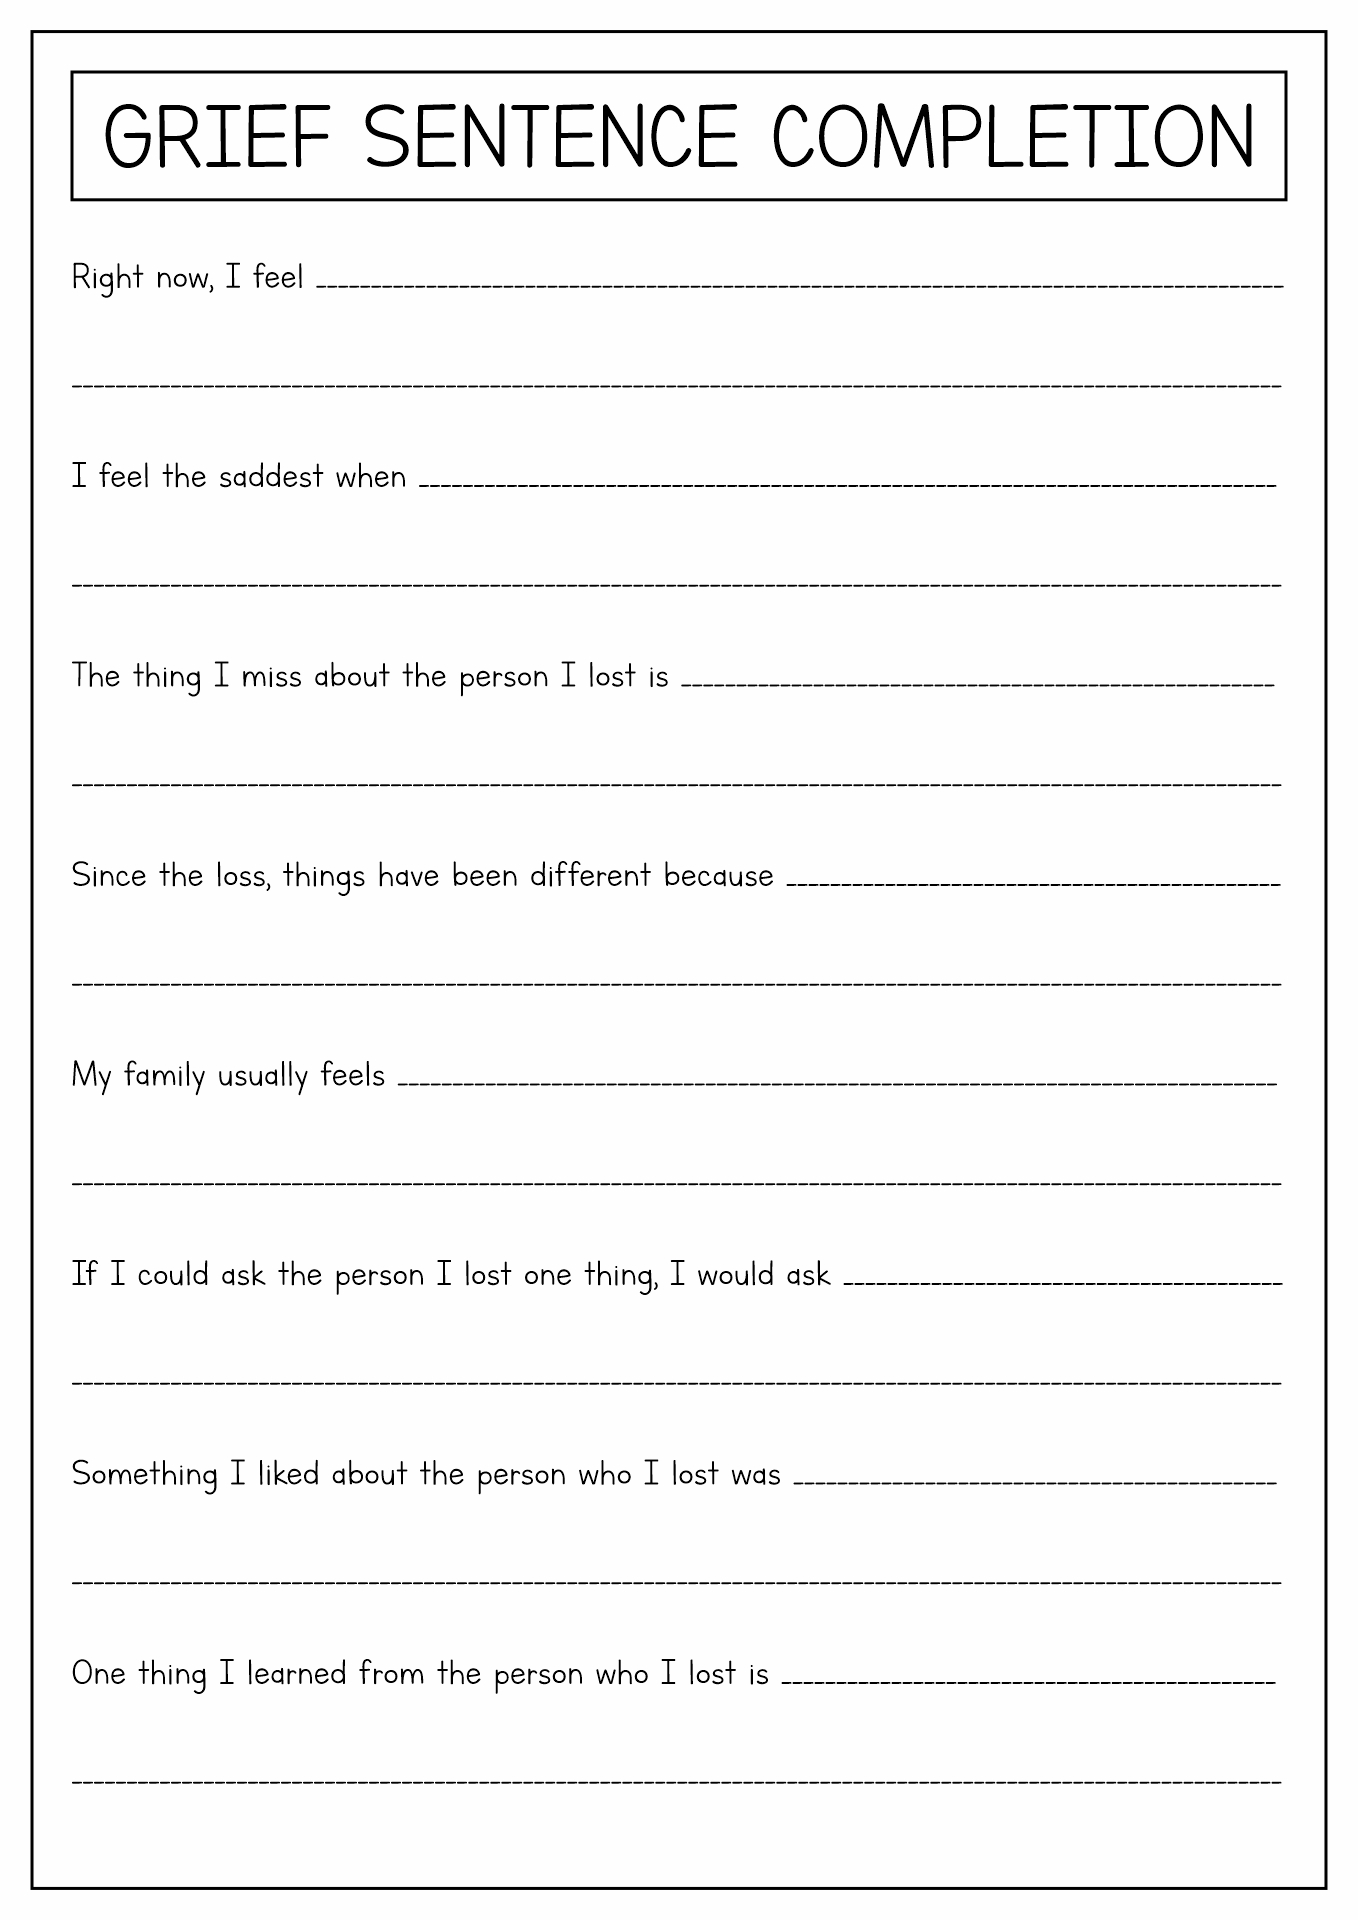 Dealing with Grief and Loss Worksheets